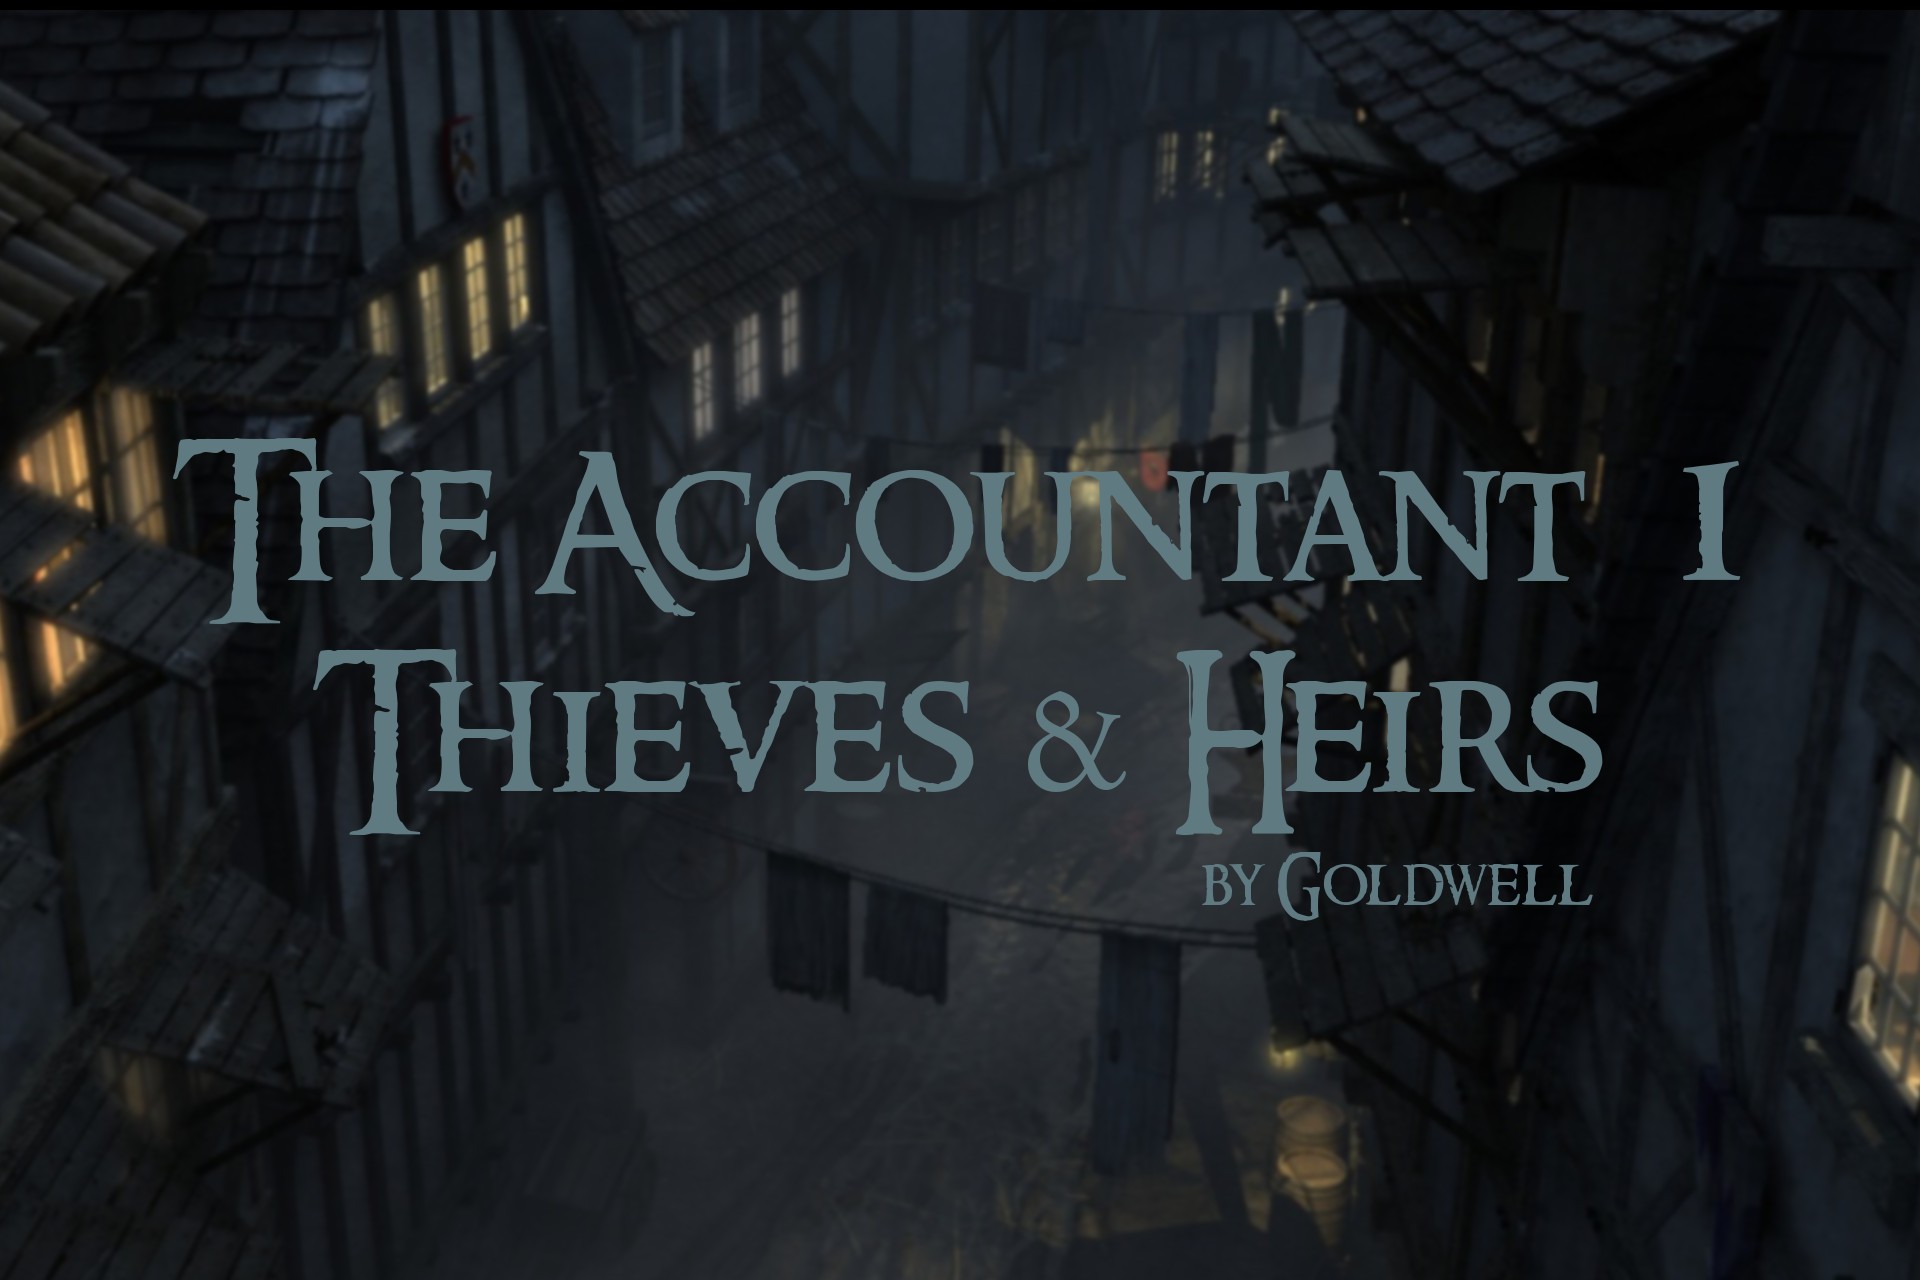 The Accountant 1: Thieves and Heirs